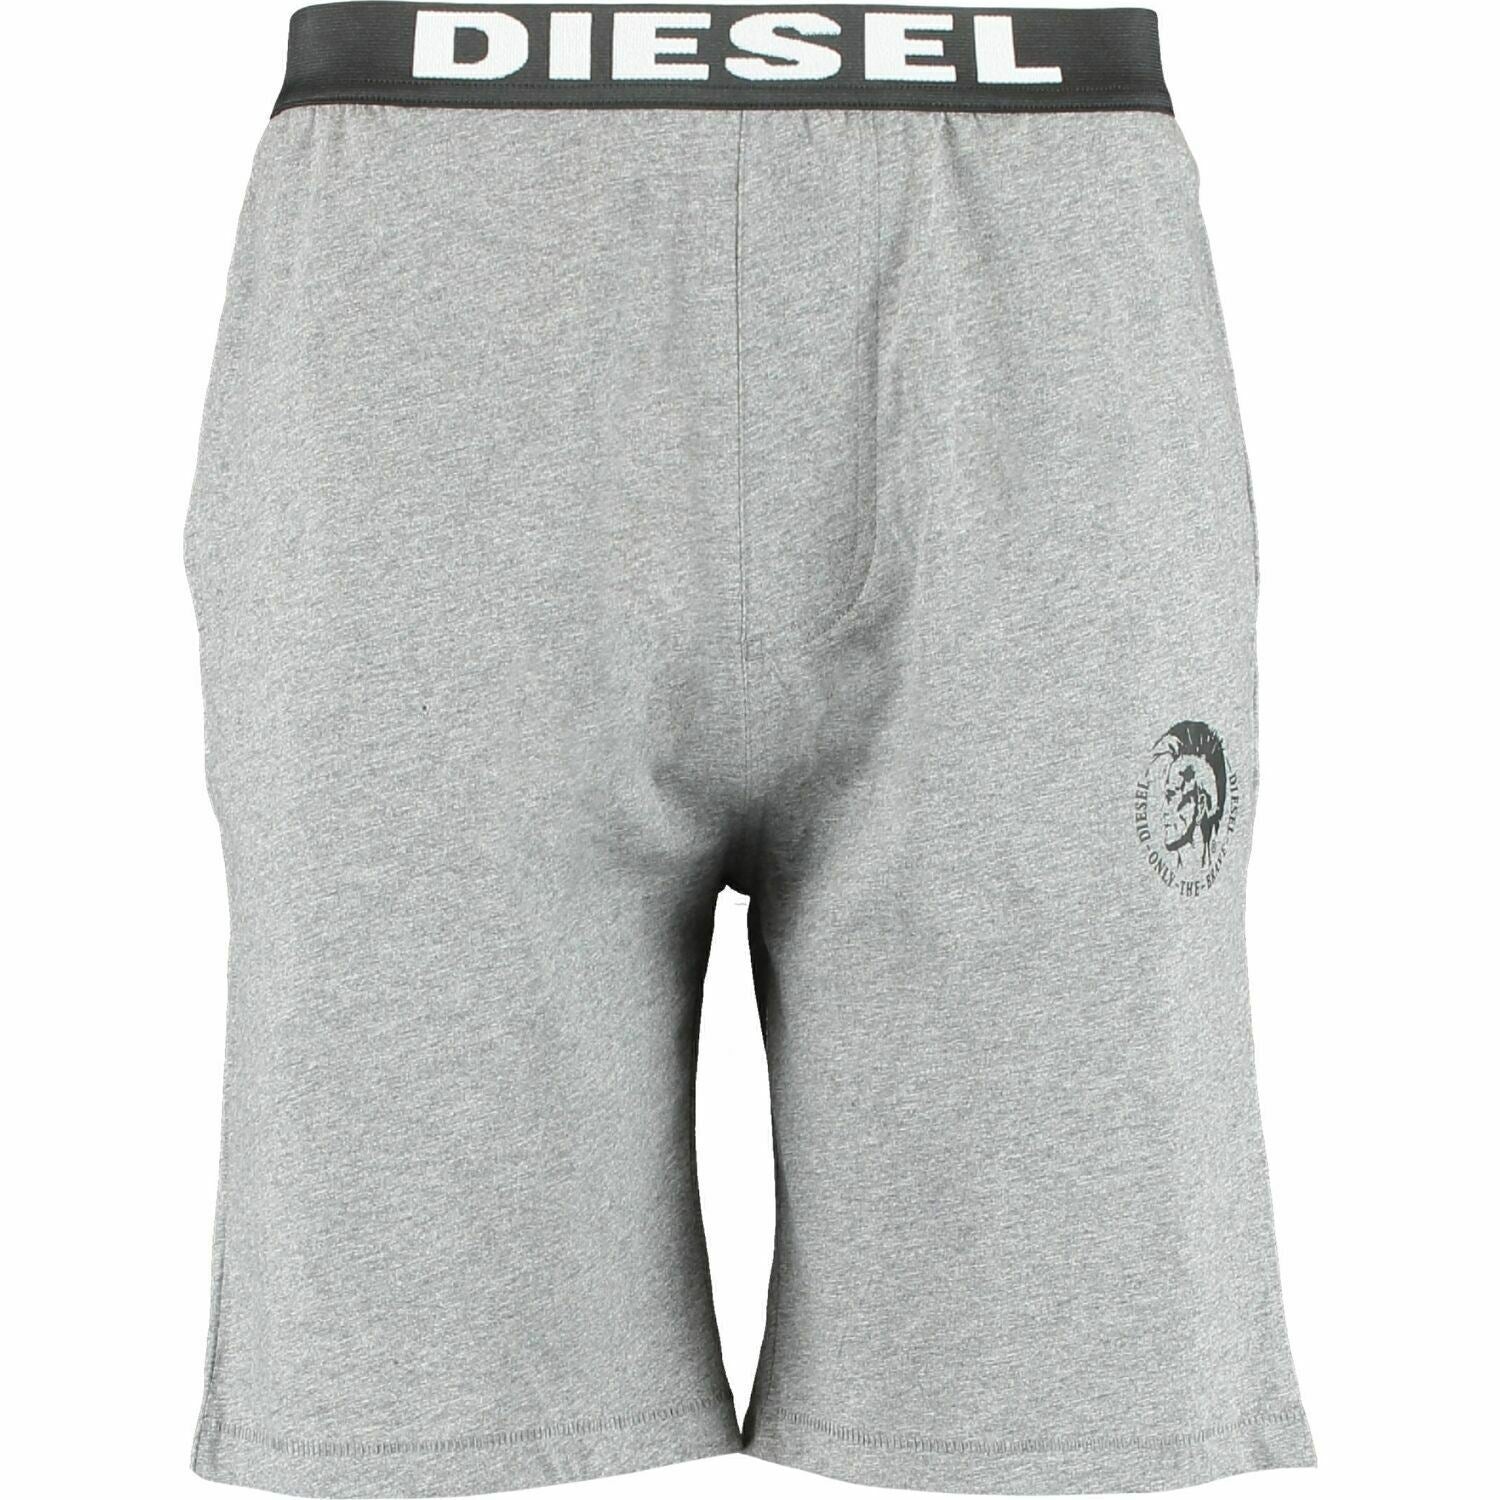 DIESEL Men's TOM Lounge Shorts, Grey, size SMALL